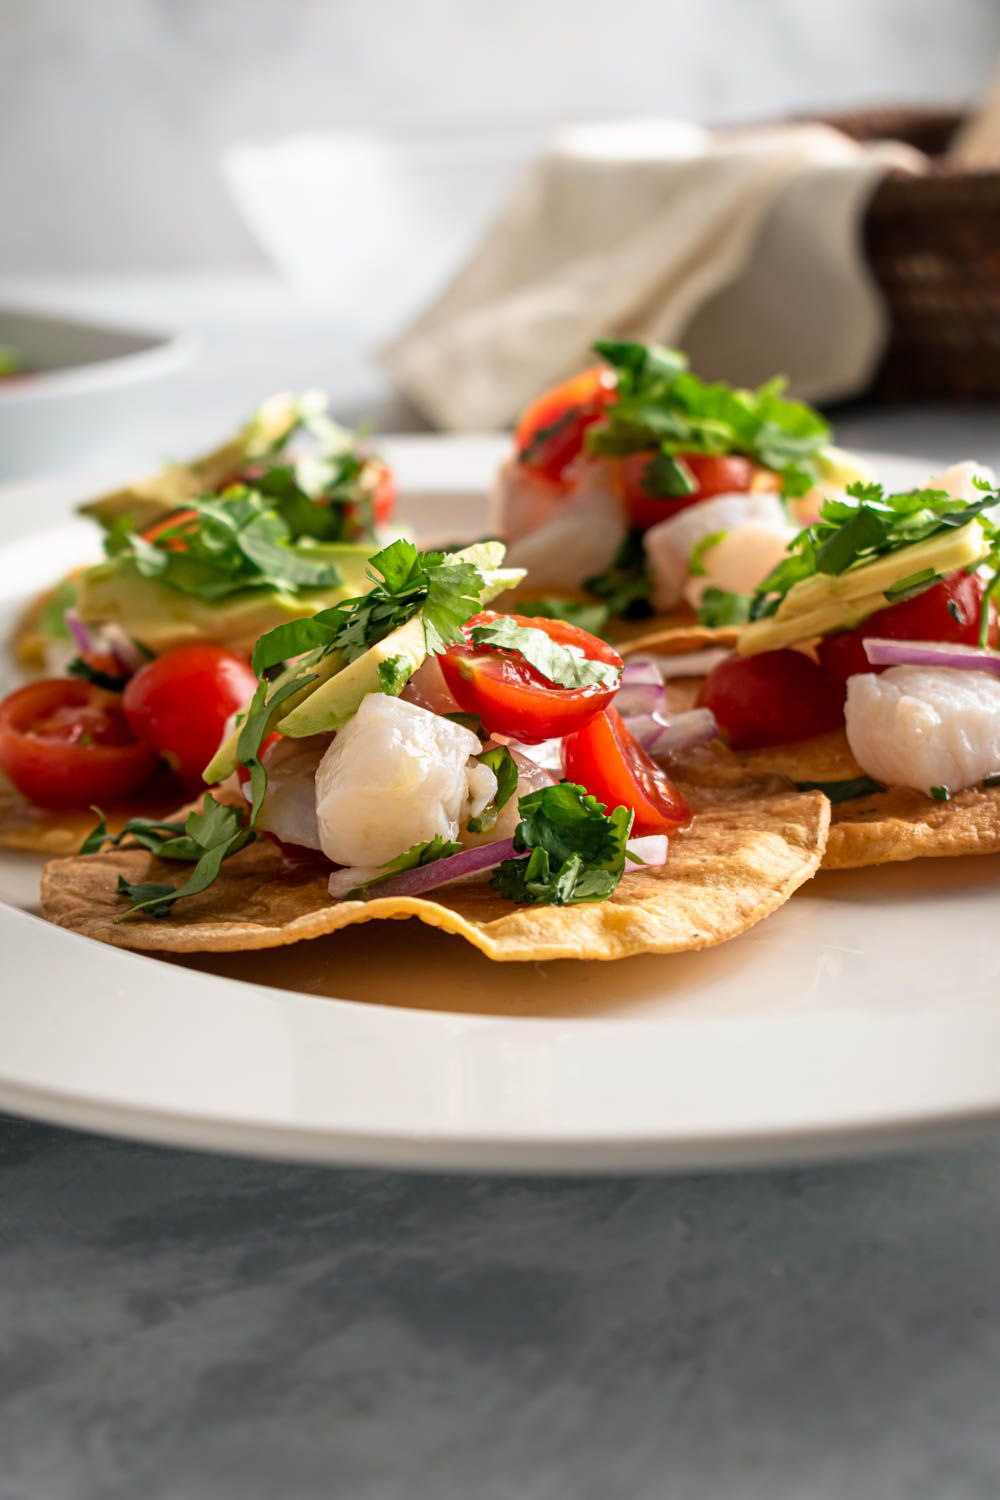 Baked tostadas with fish ceviche served on a plate with avocado, cilantro, and limes.